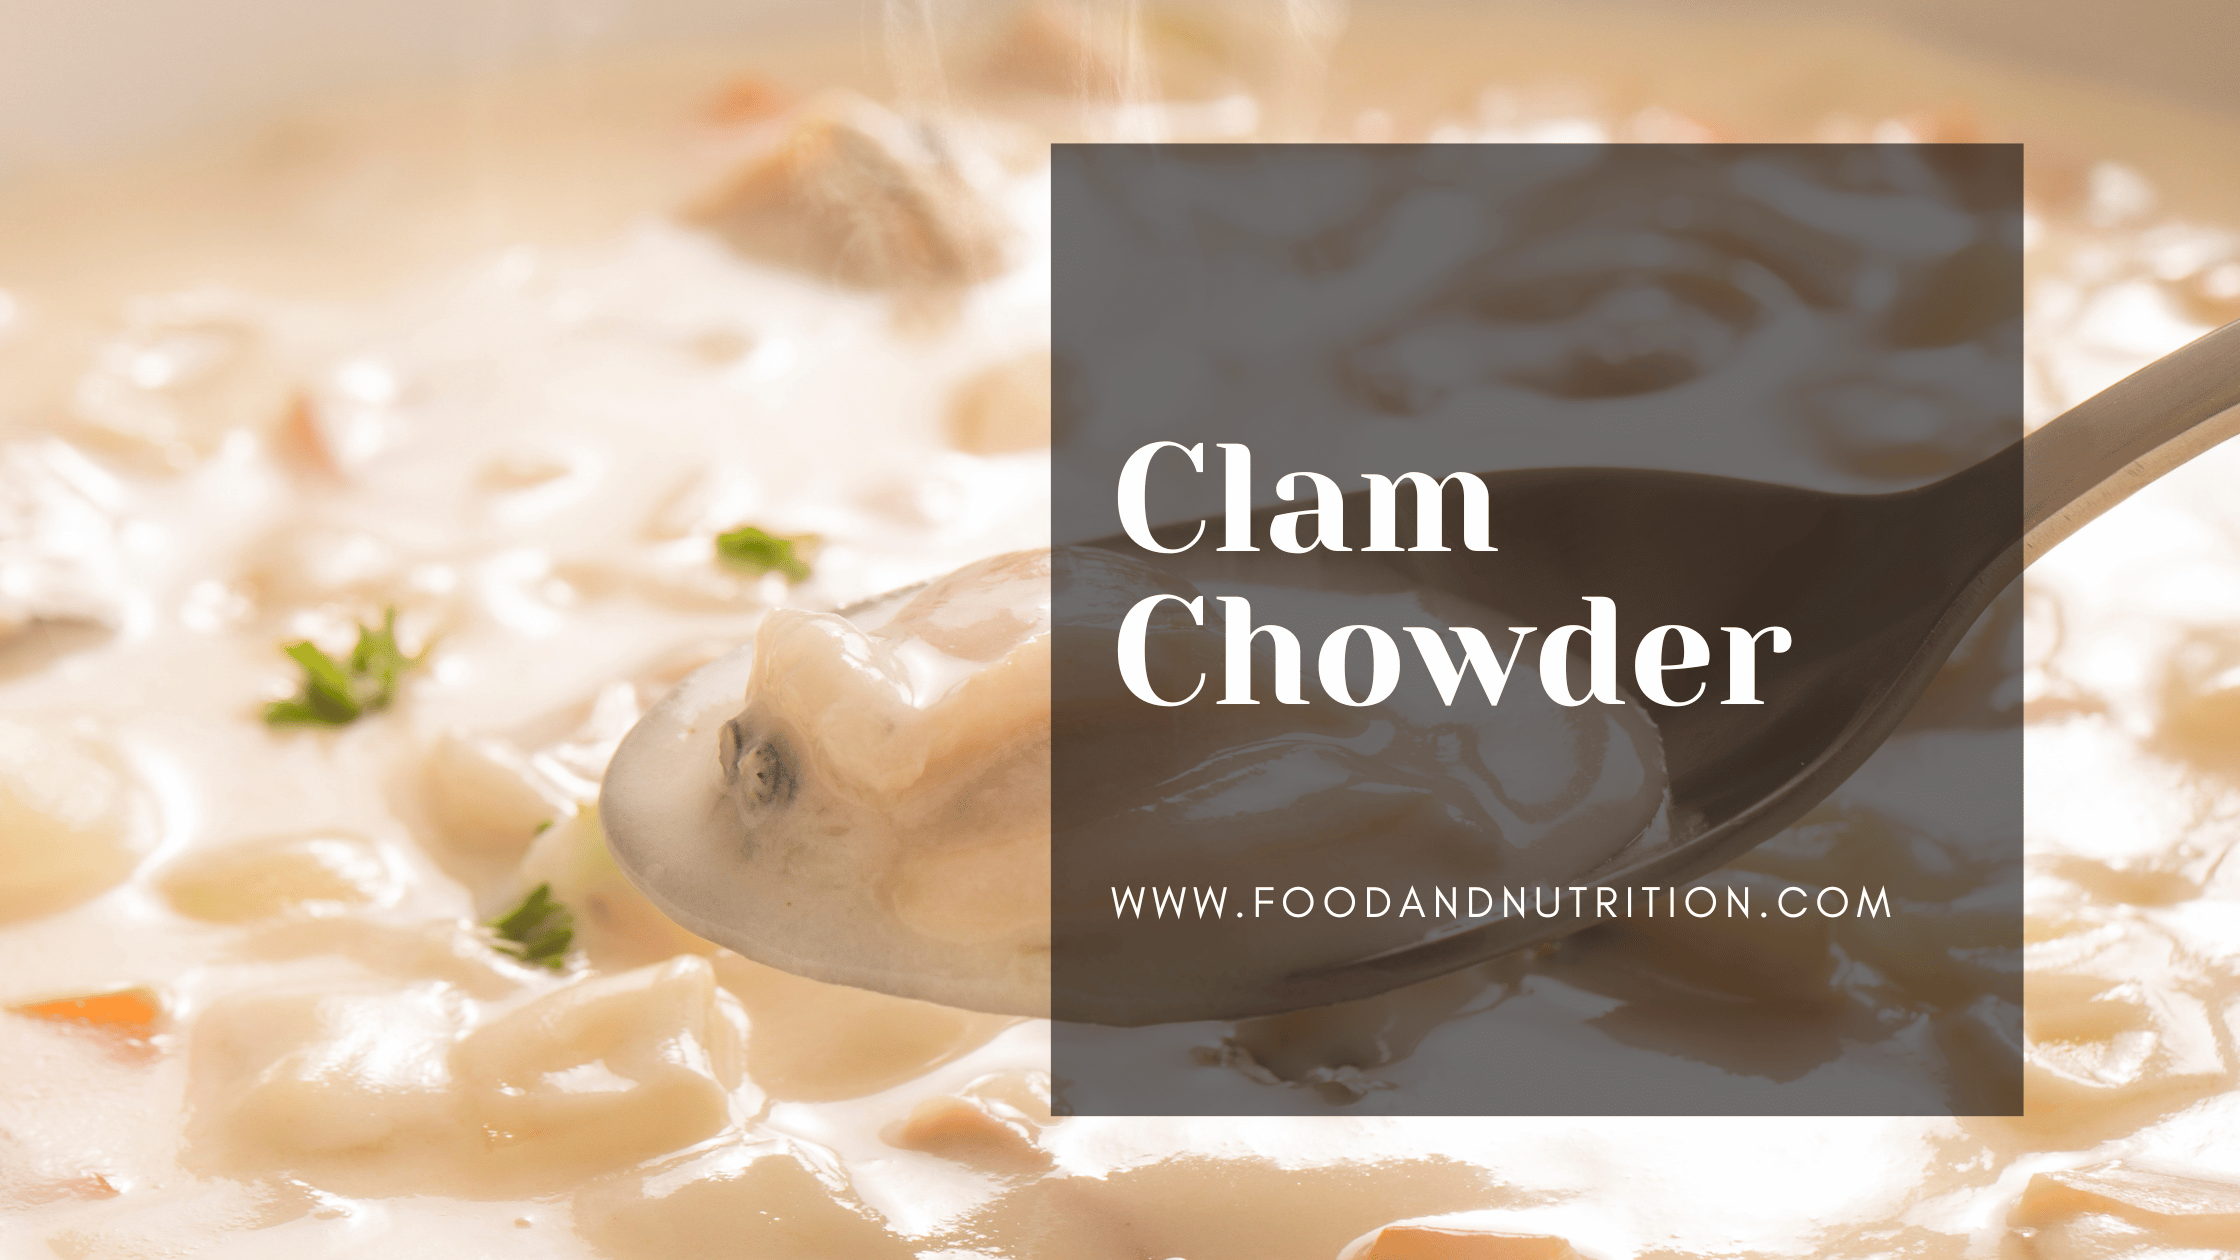 Clam Chowder Reimagined: Taste Meets Nutrition